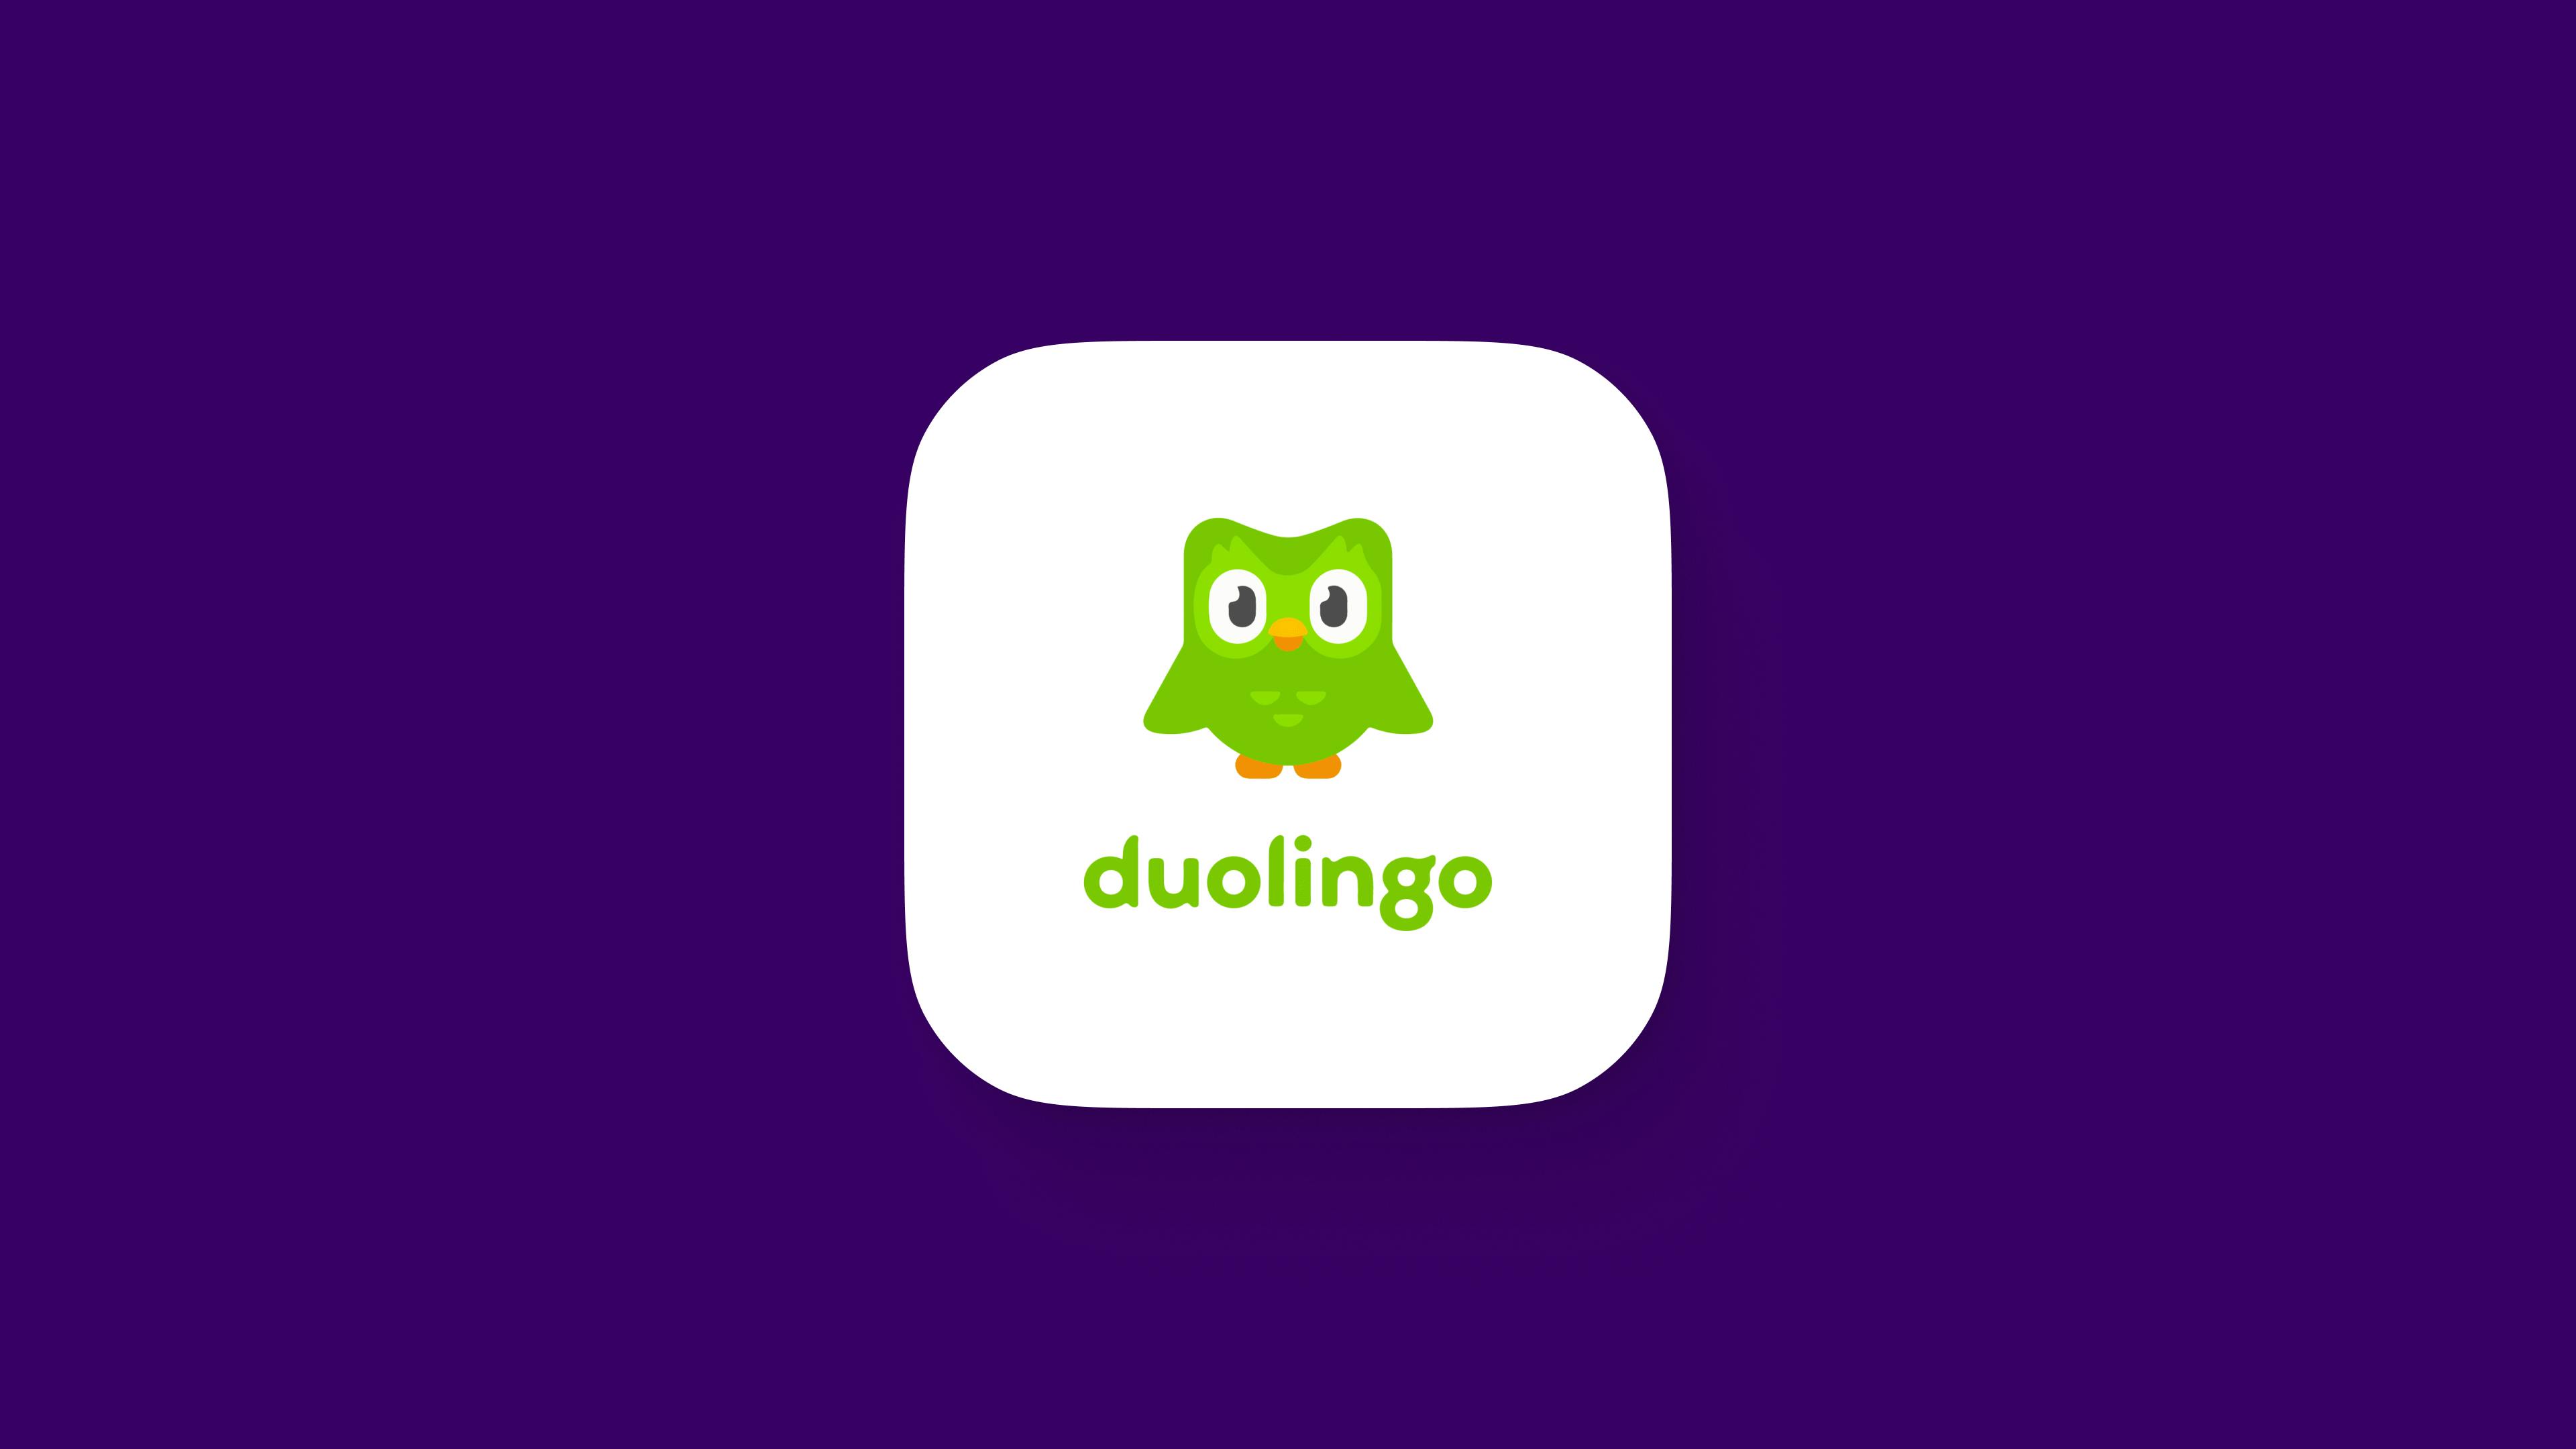 duolingo app for learning languages - Headway App